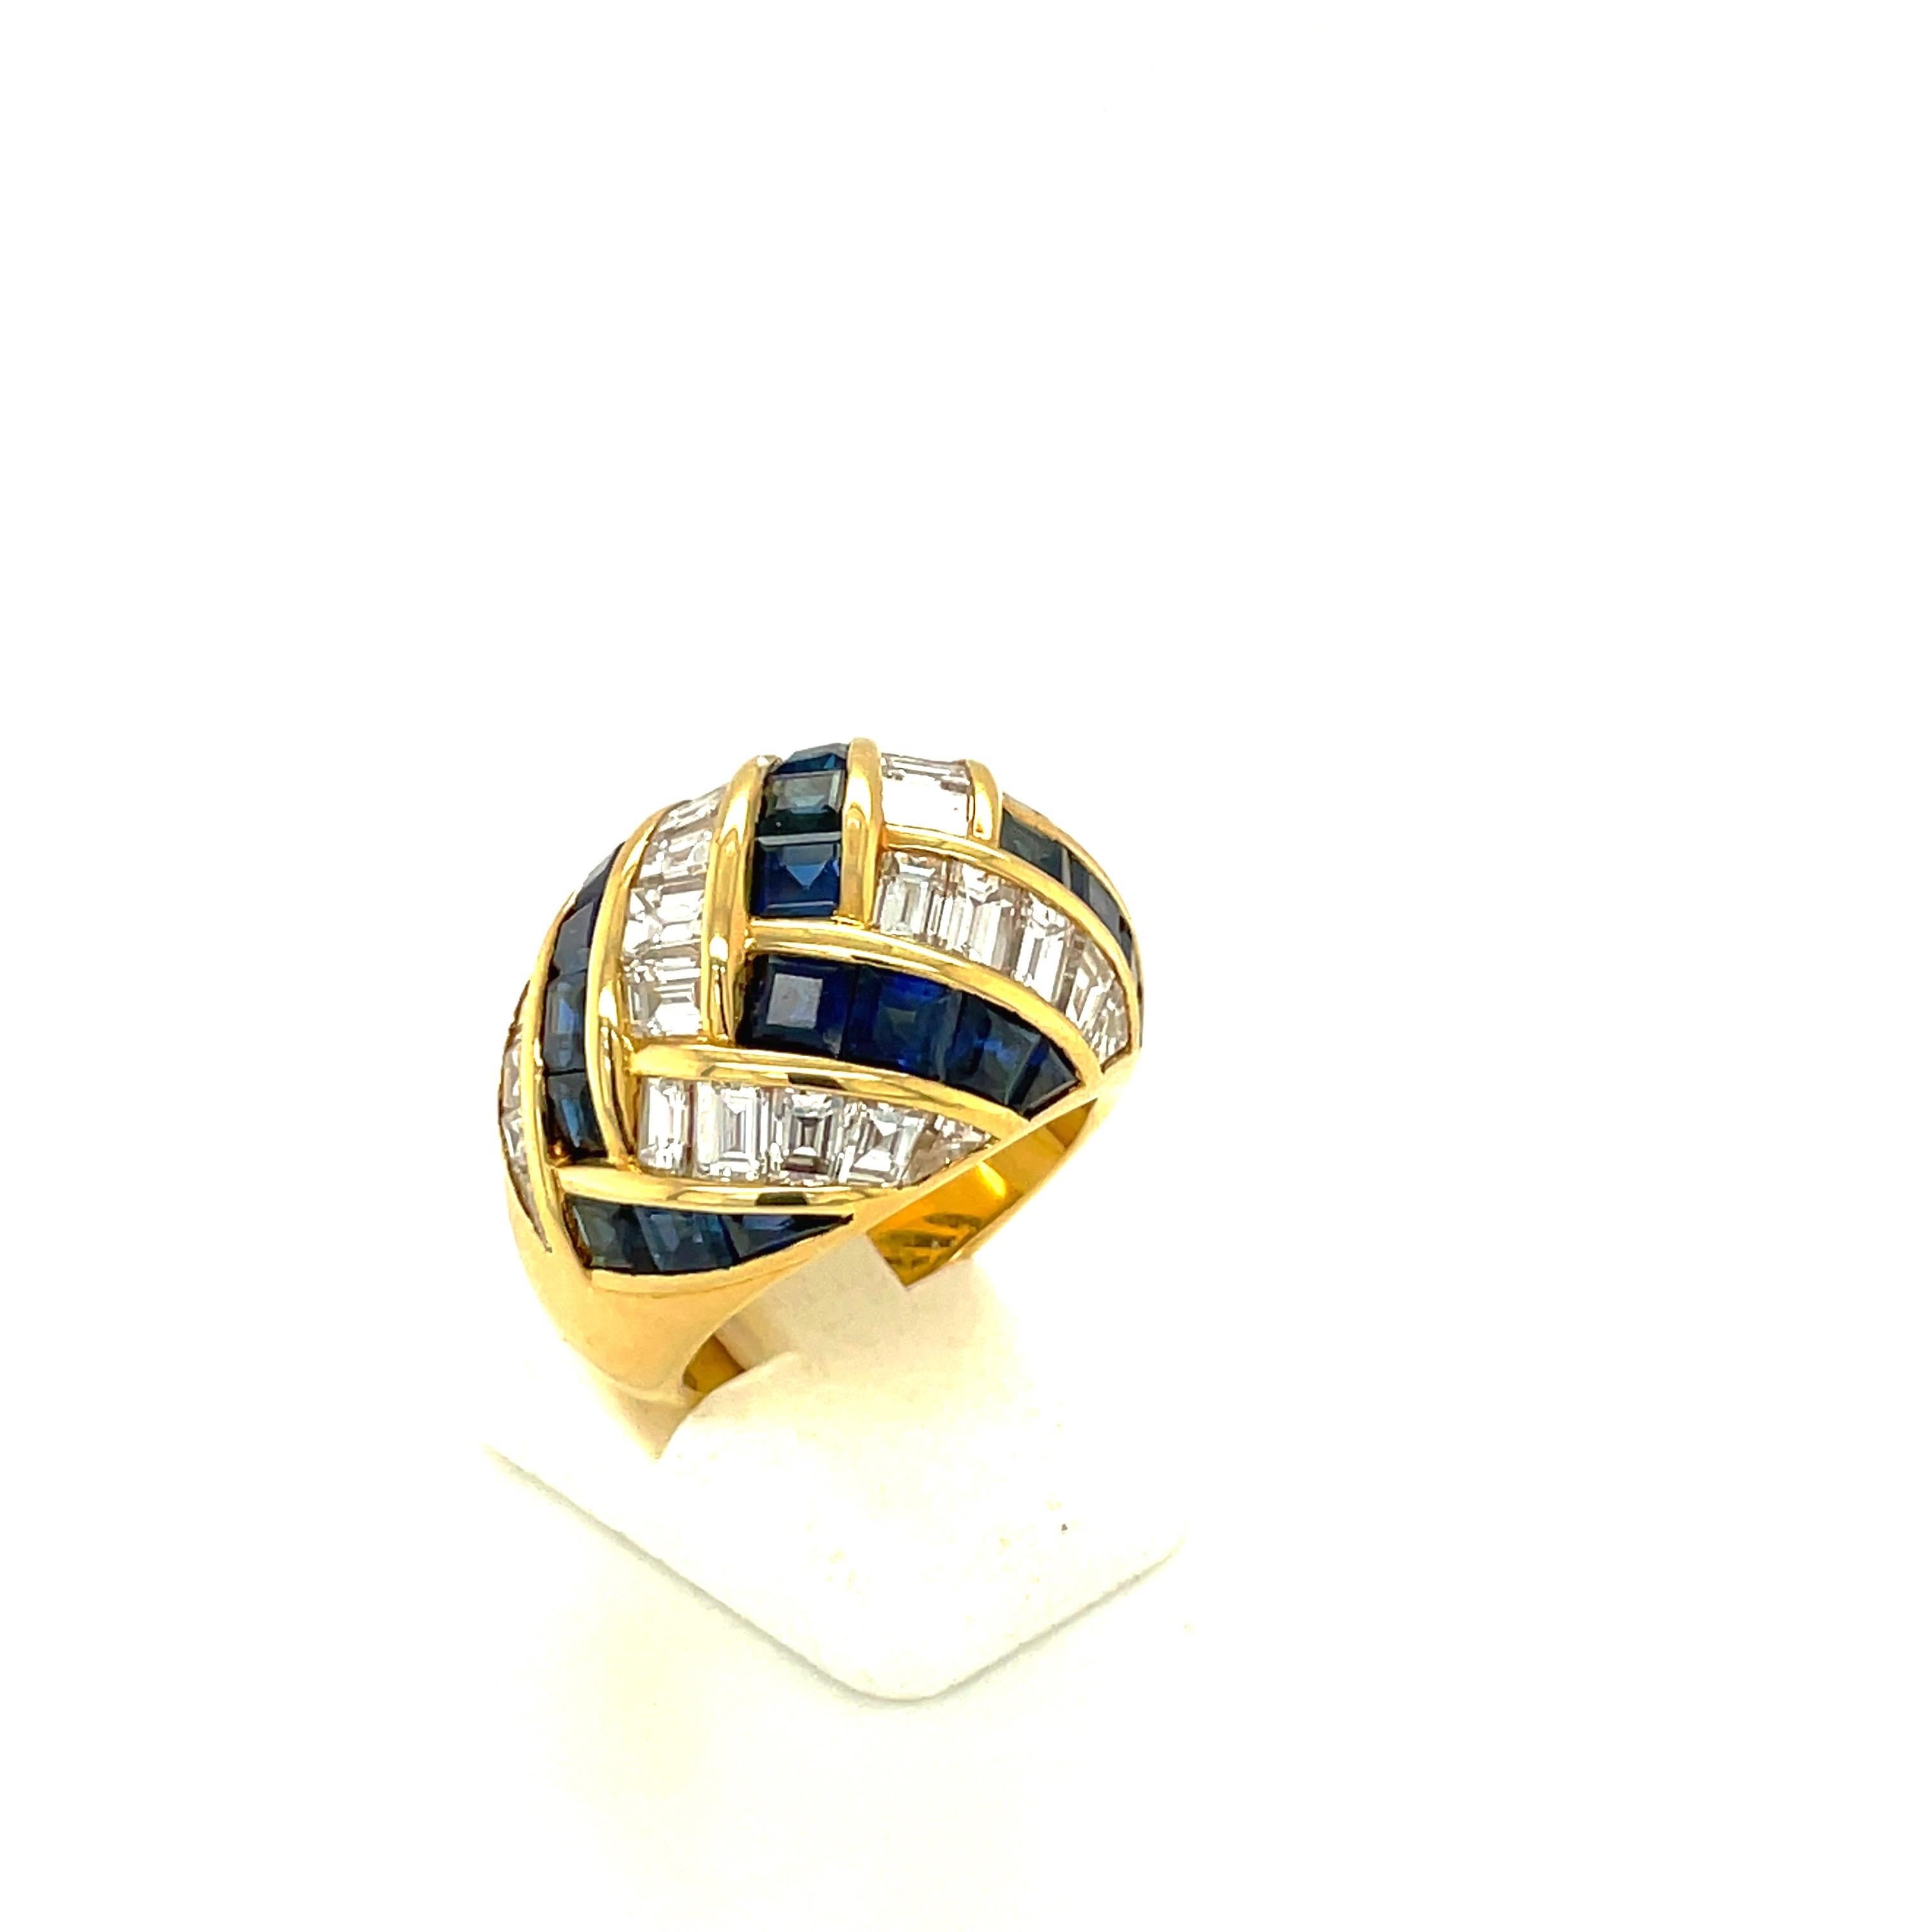 Crafted by the famed Italian designer Guiseppe Picchiotti, this ring is a perfect example of his meticulous work. Designed in 18 karat yellow gold this ring is beautifully set with alternating baguette cut diamonds and square cut blue sapphires in